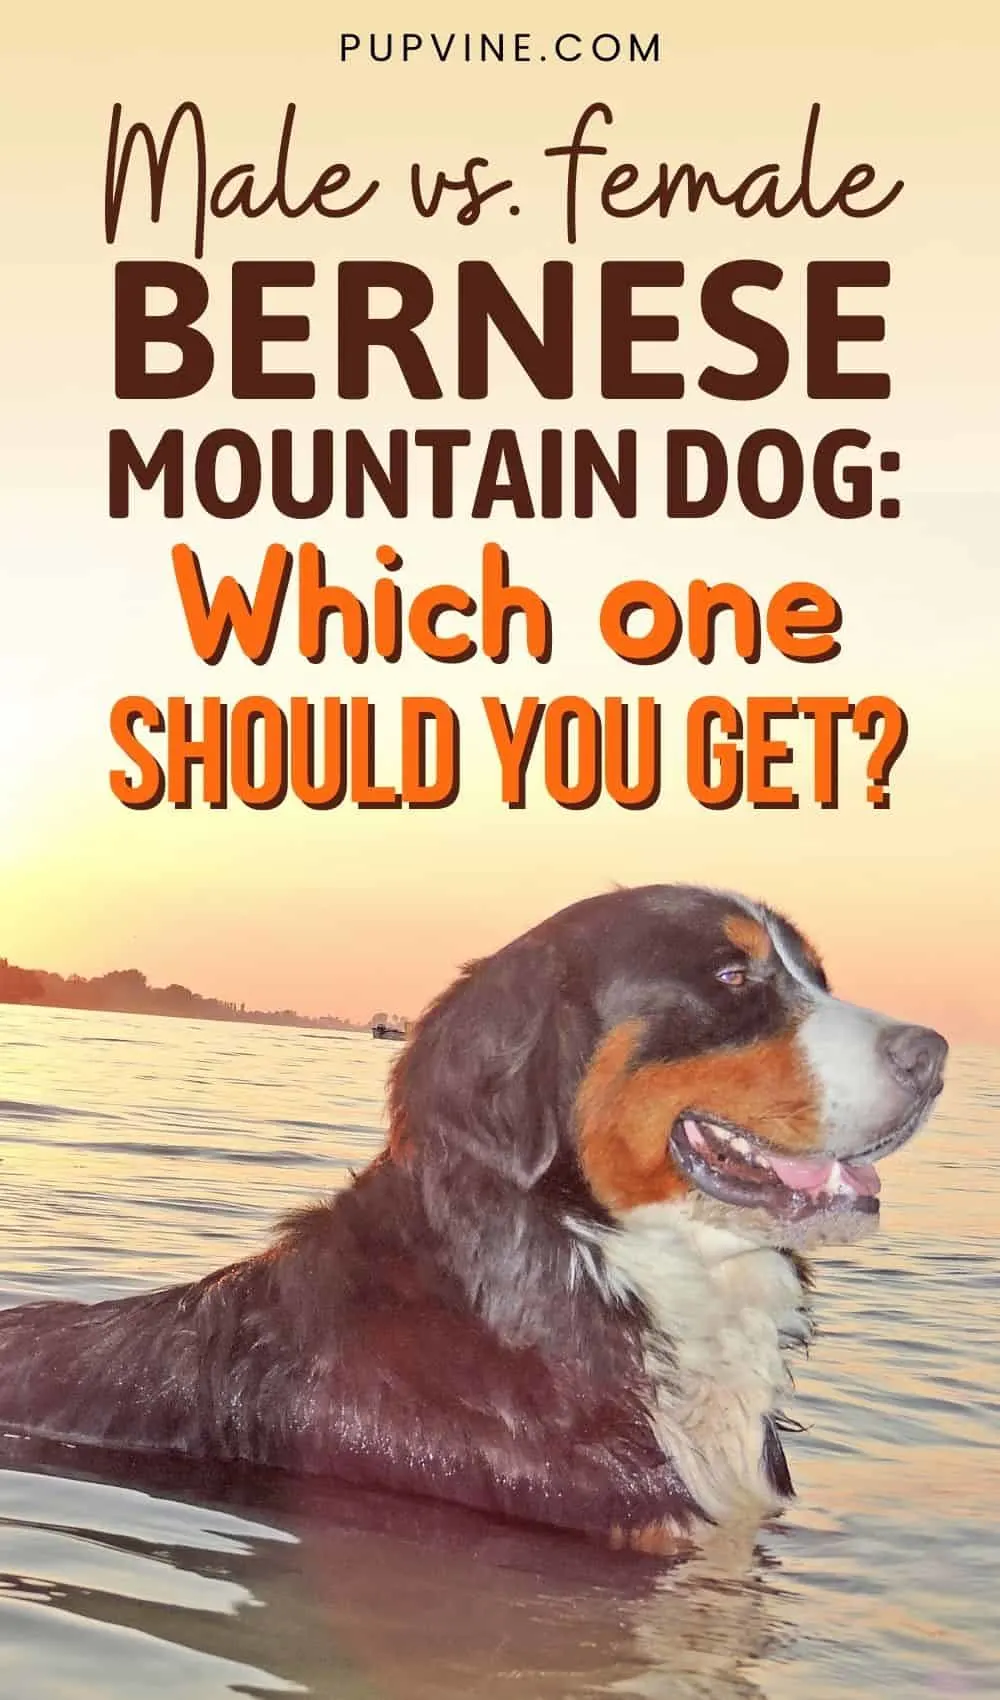 Male Vs. Female Bernese Mountain Dog Which One Should You Get